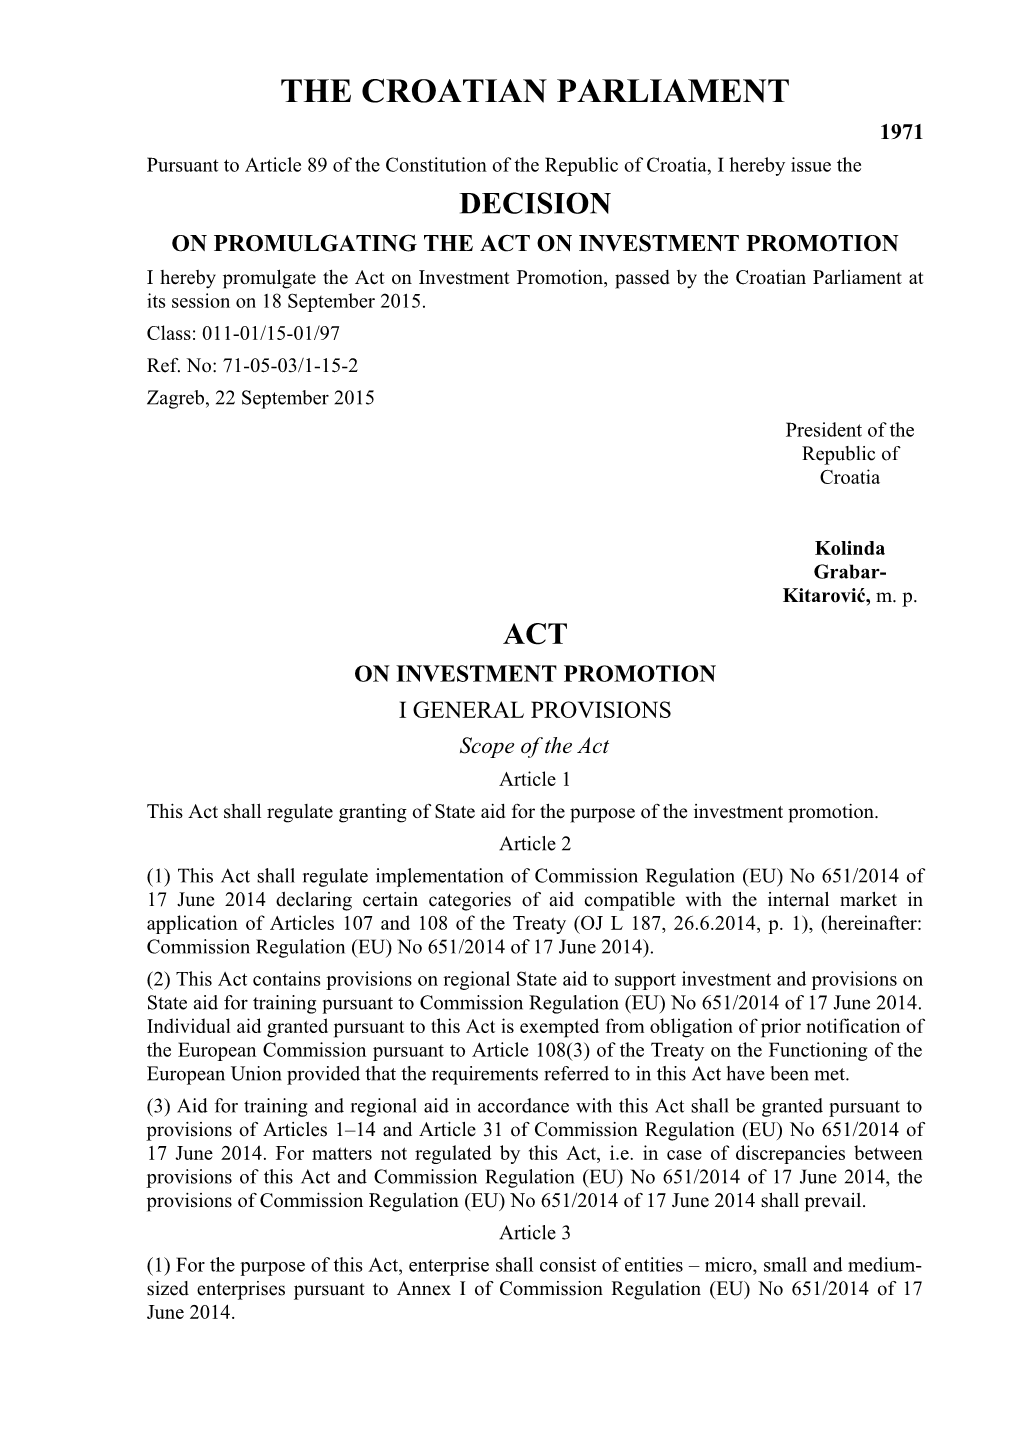 On Promulgating the Act Oninvestment Promotion